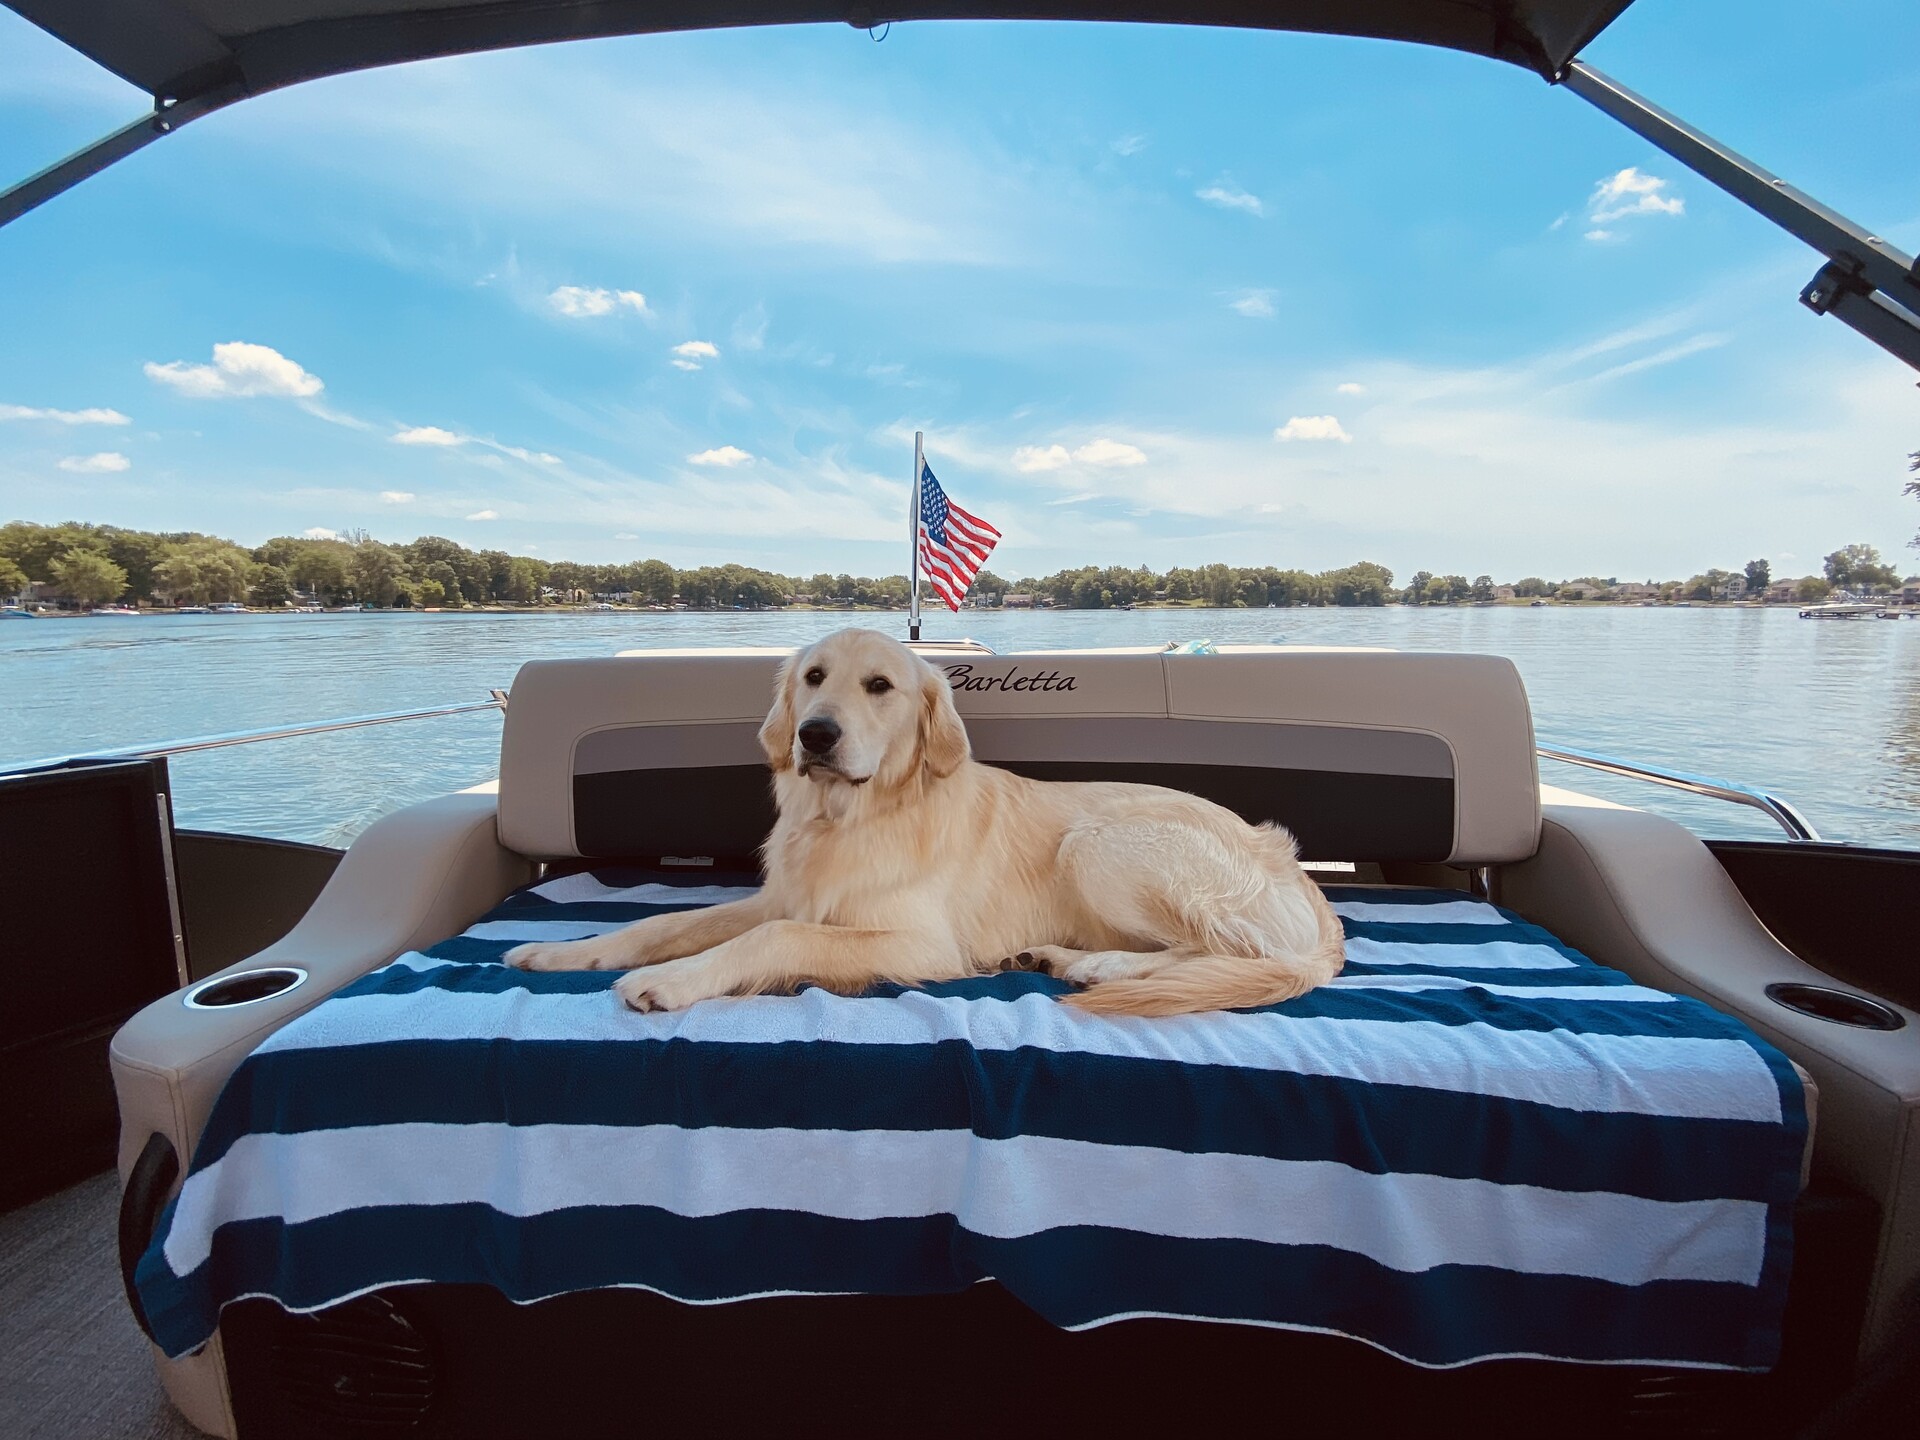 The Best Boat Towels: 4 Options to Consider